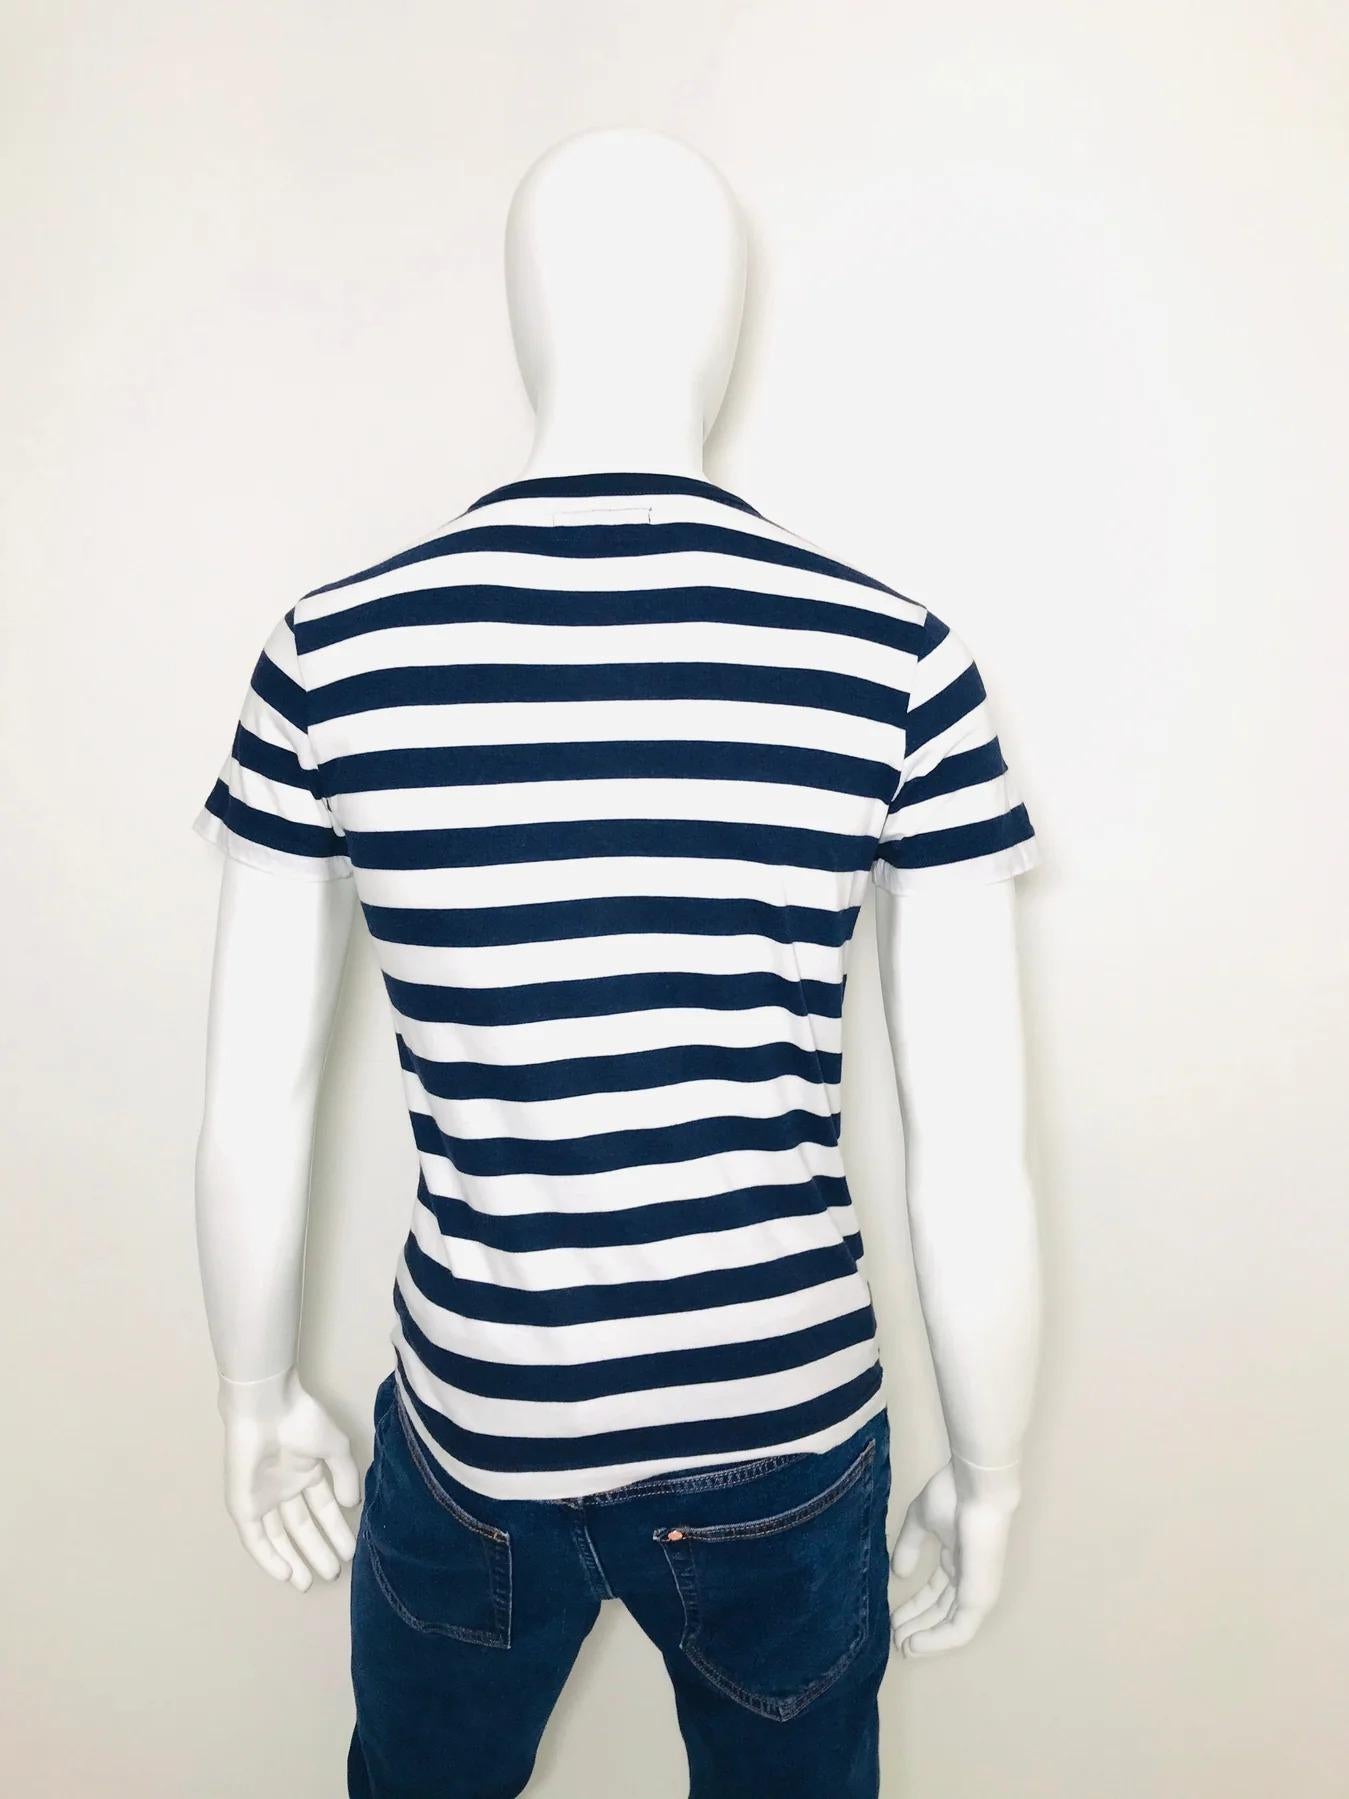 Officine Generale Stripe T- shirt In Excellent Condition For Sale In London, GB